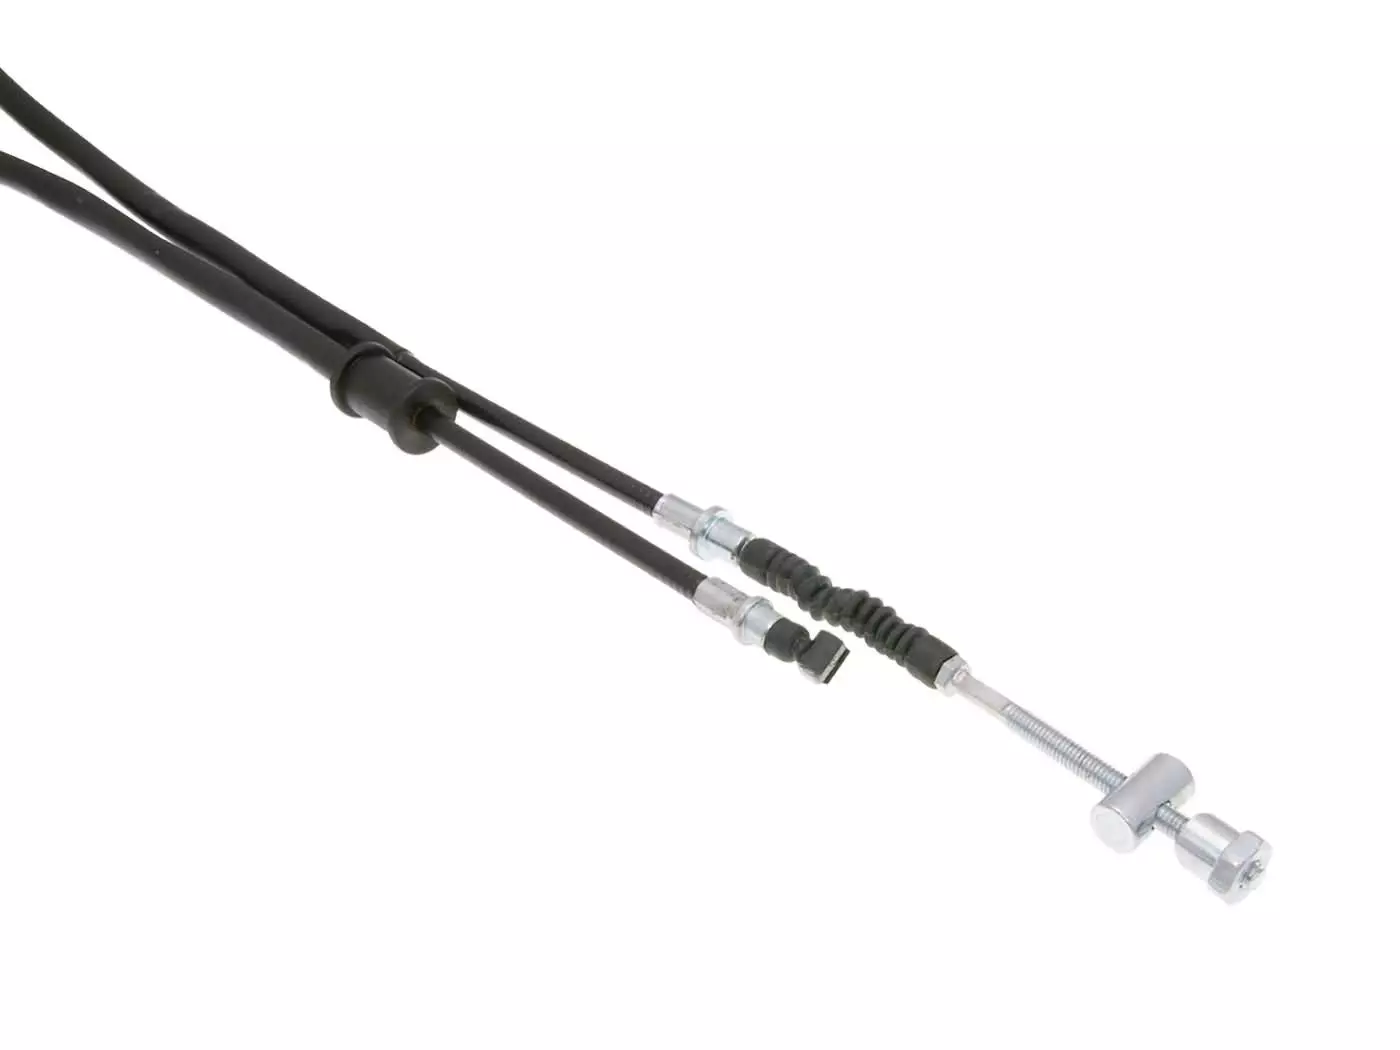 Rear Brake Cable For Kymco Filly, Agility, V-Clic, ST, Baotian QT-9 = BT24017